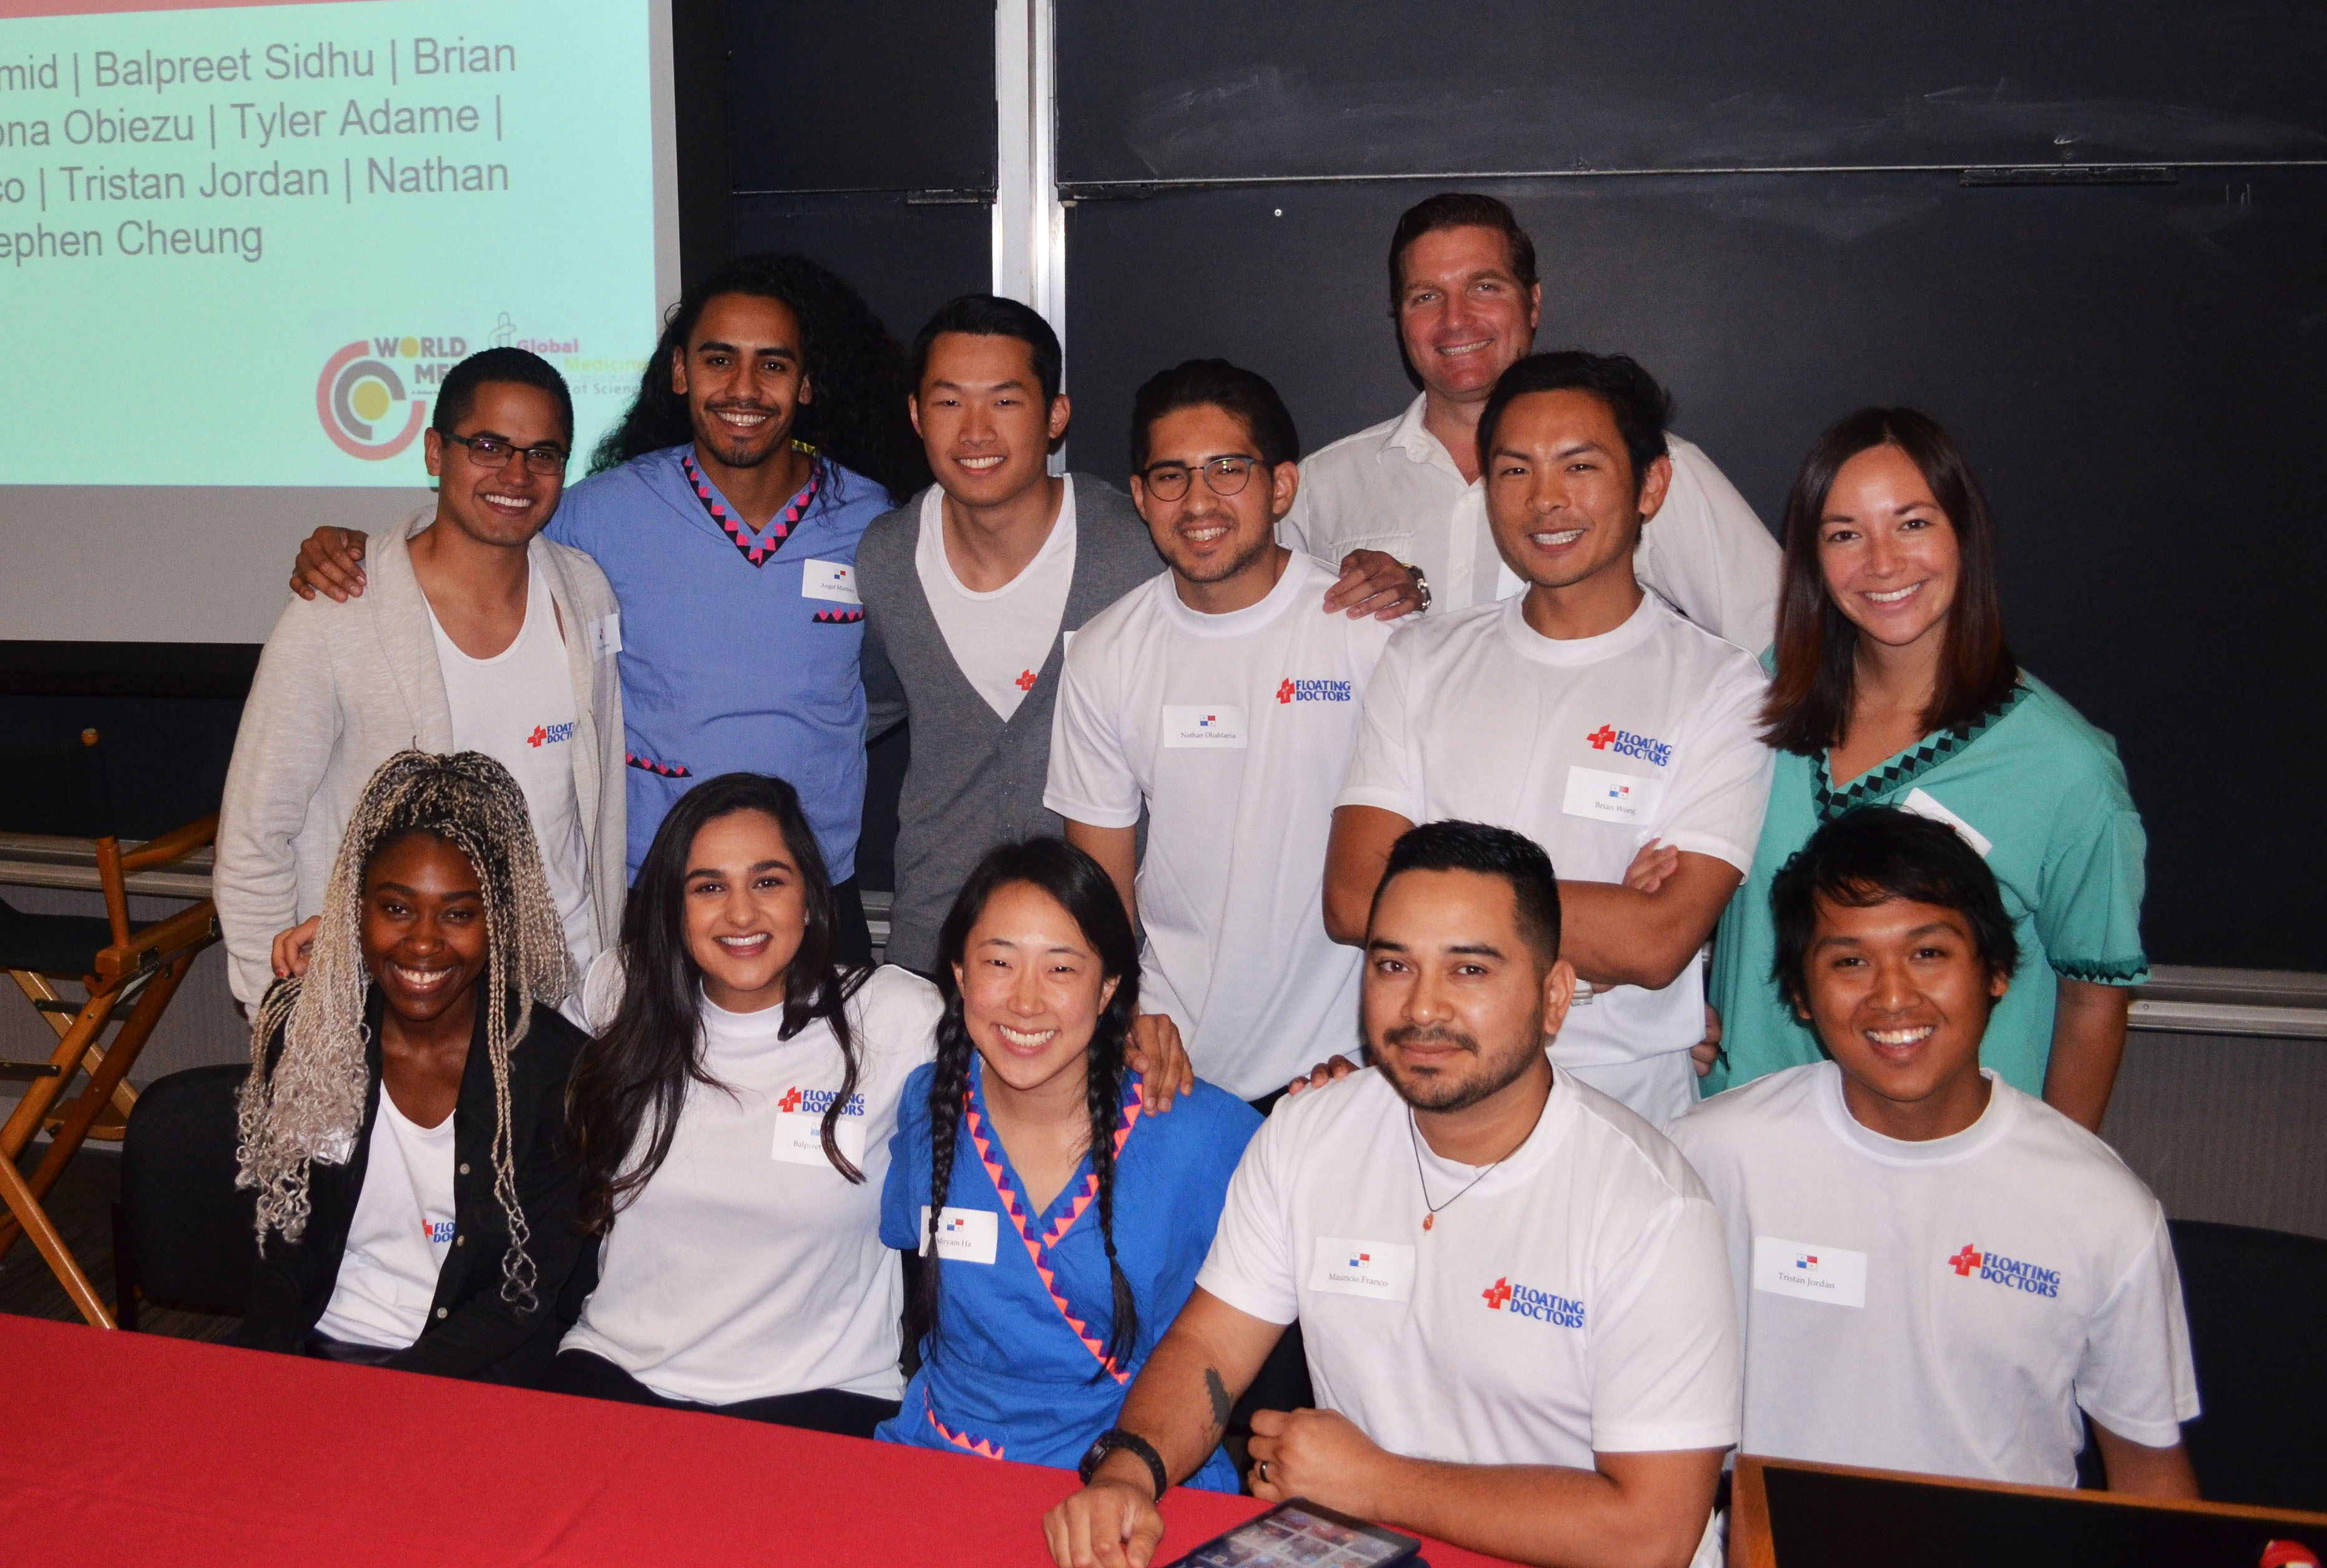 Master of Science in Global Medicine students who participated in the Spring 2017 Panama study abroad trip are joined by Benjamin LaBrot, founder and CEO of Floating Doctors, during a recent trip to Panama. 
Pictured (front row, left to right): Fiona Obiezu, Balpreet Sidhu, Miryam Ha, Mauricio Franco, Tristan Jordan. (Back row): Tyler Adame, Angel Martinez, Stephen Cheung, Nathan Dhablania, Brian Wong, Cassandra McDiarmid